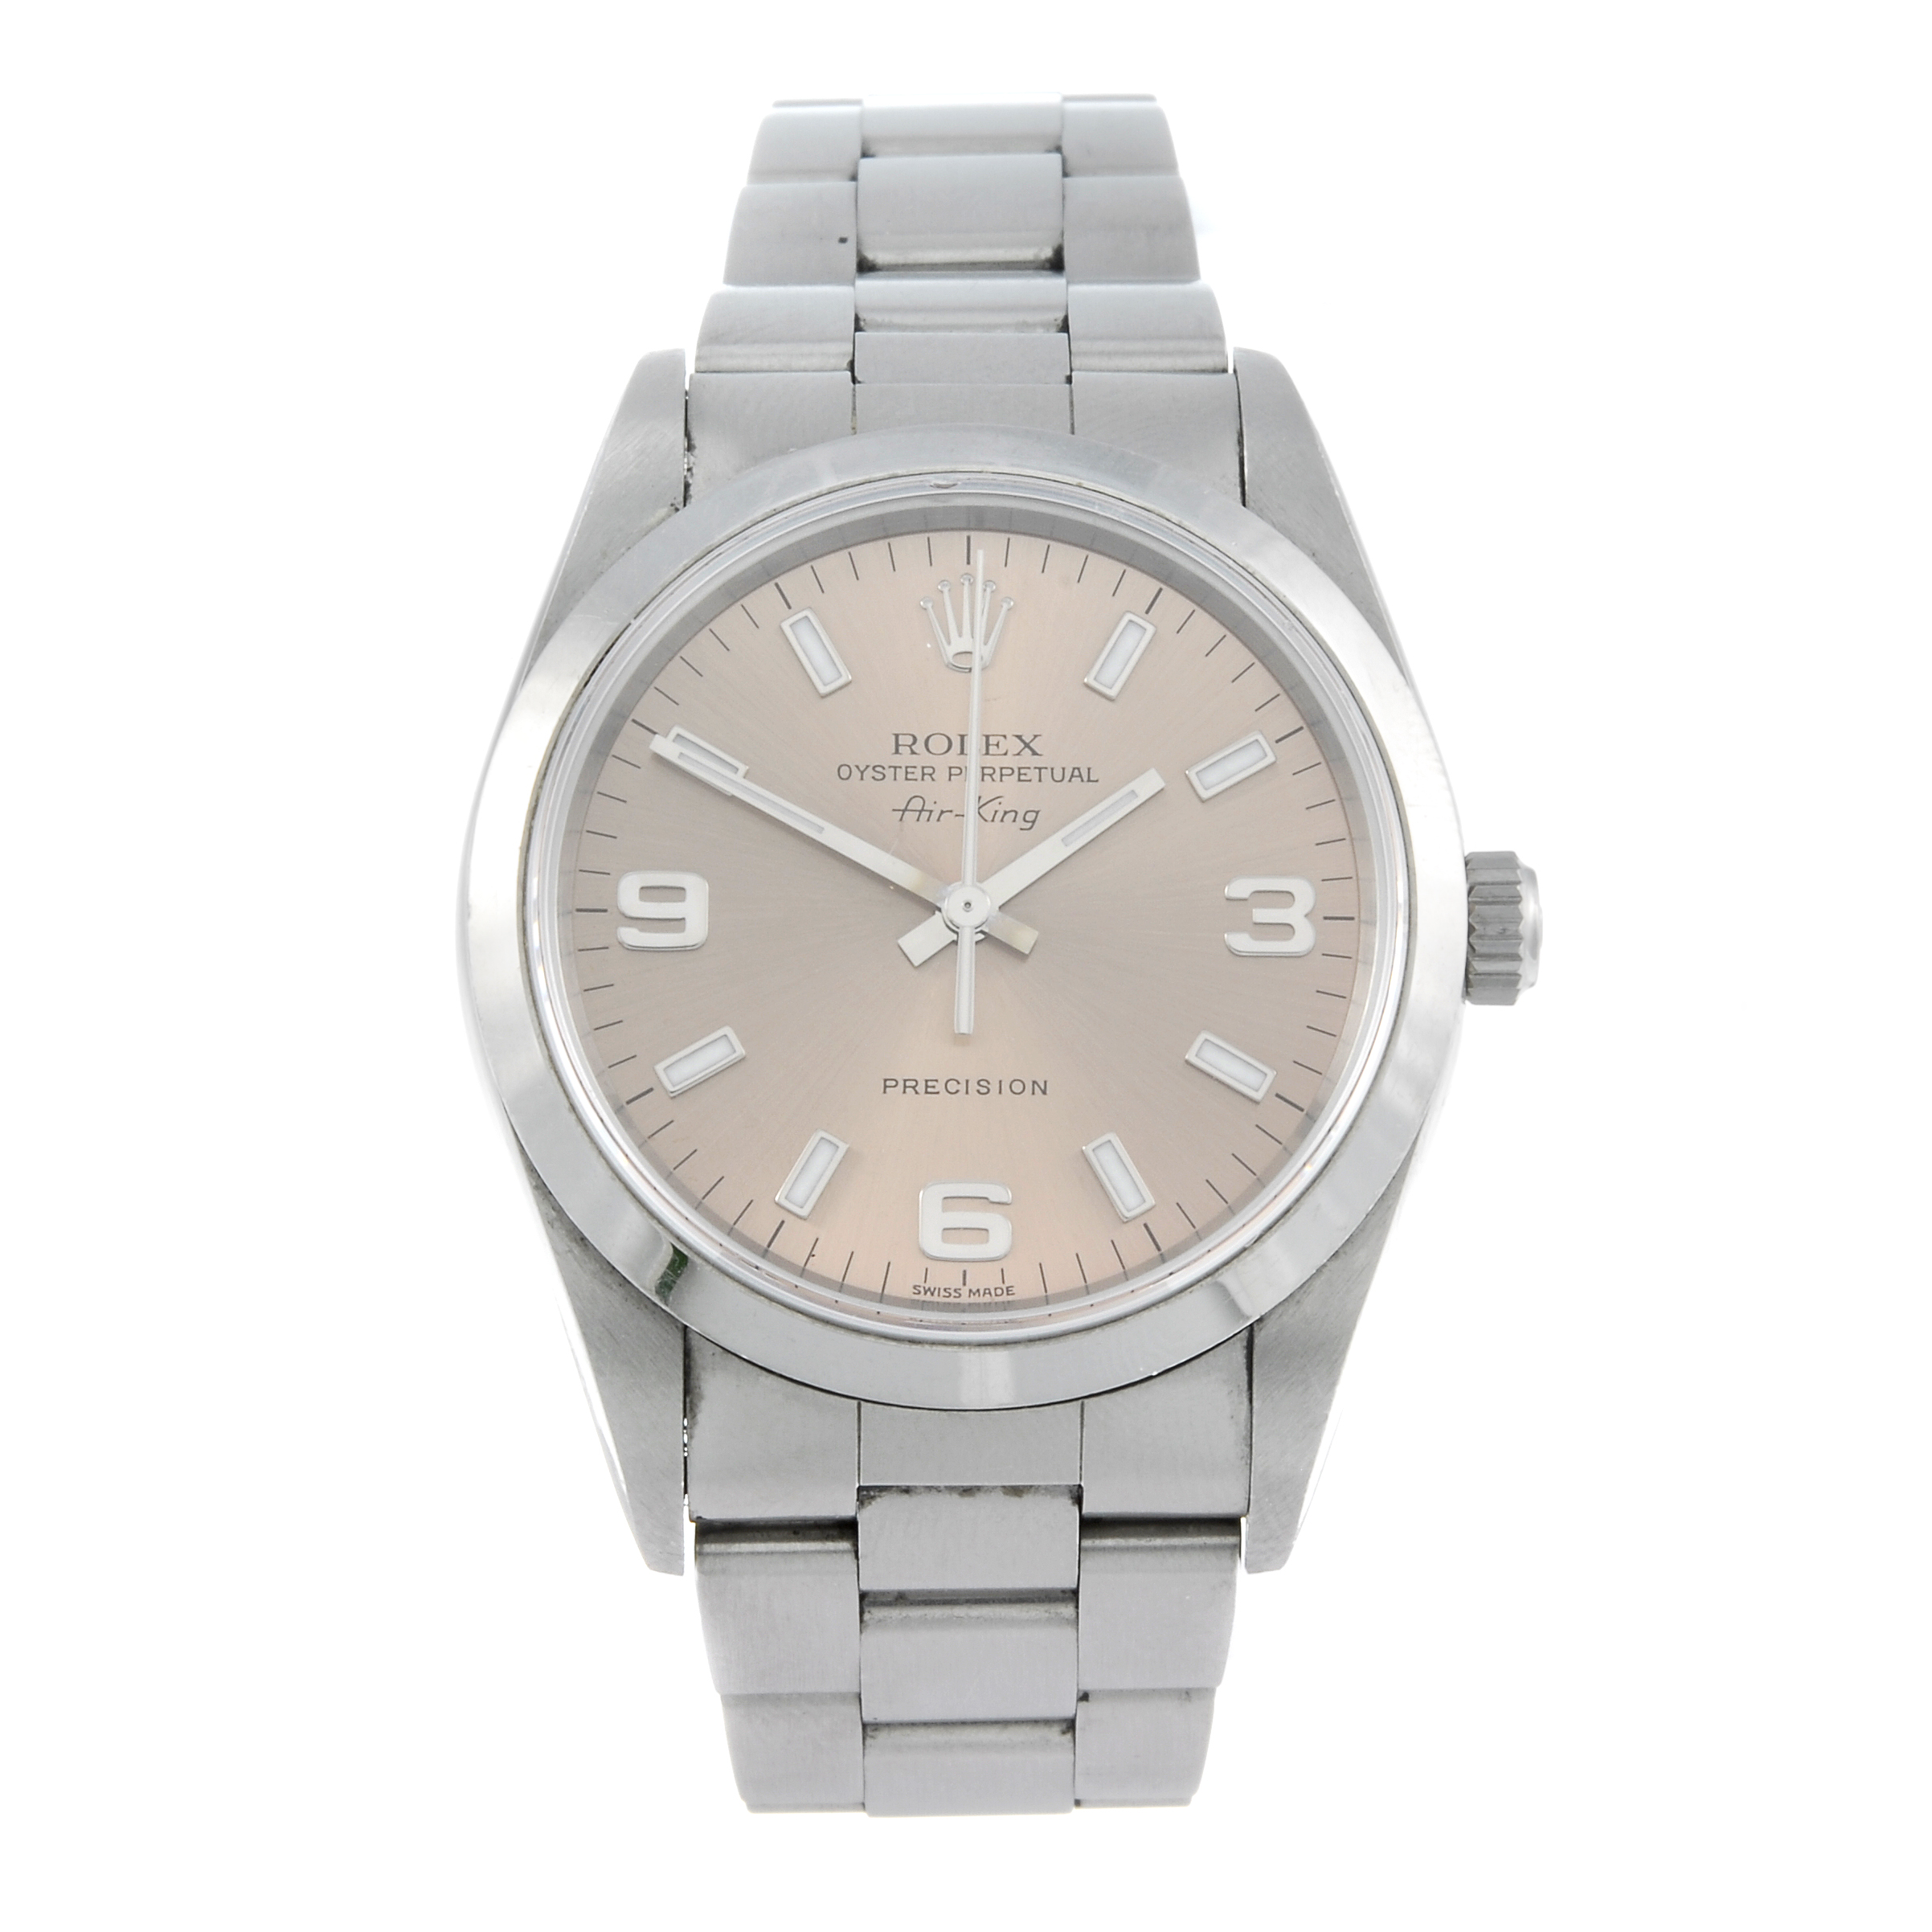 ROLEX - a gentleman's Air-King bracelet watch. Circa 2002. Stainless steel case. Reference 14000M,